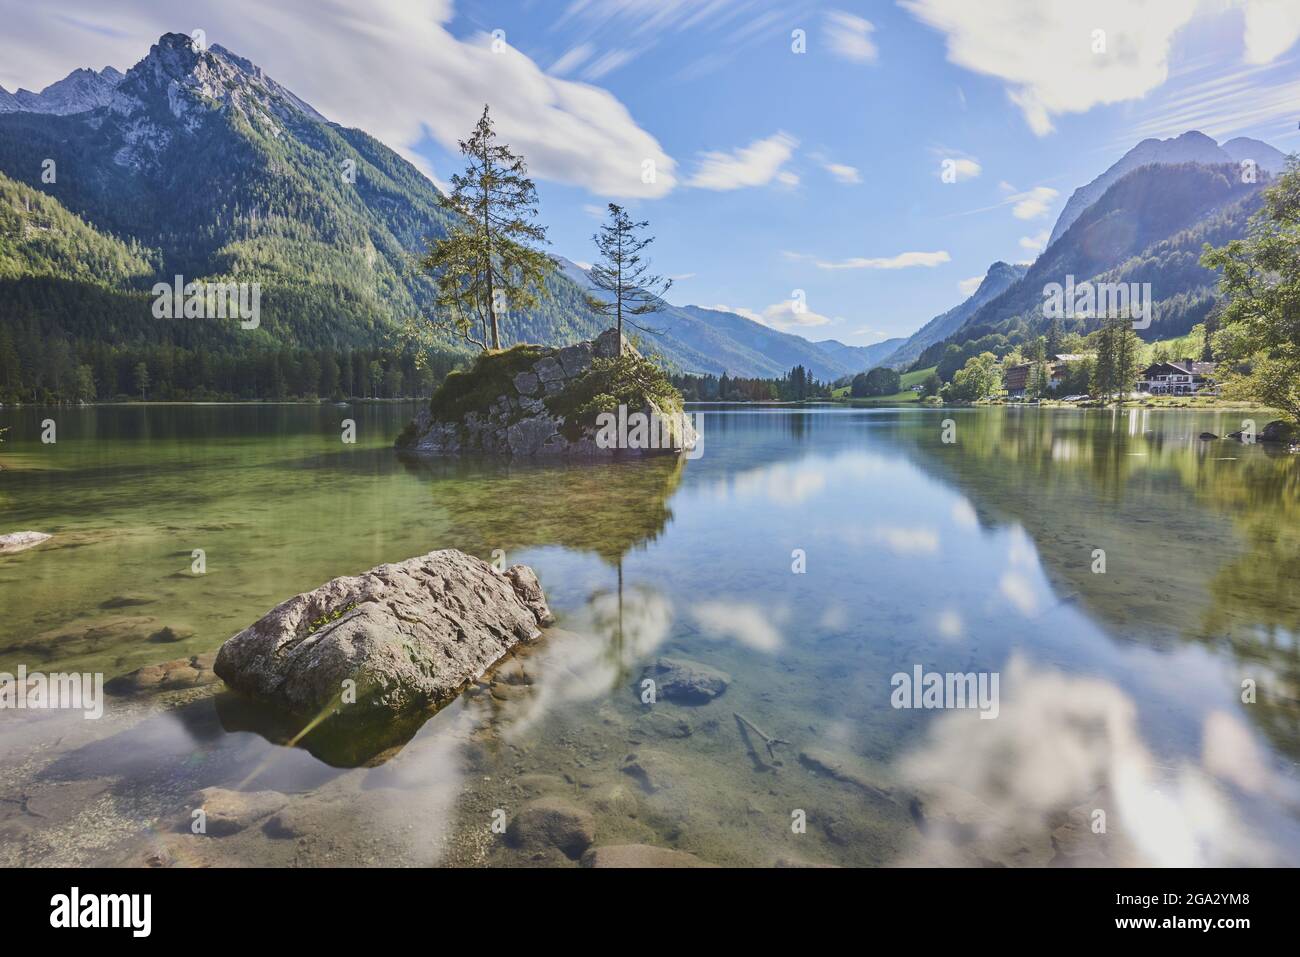 Norway spruce (Picea abies) tree on a small, rock island in the clear waters of Lake Hintersee, Bavarian Alps Stock Photo